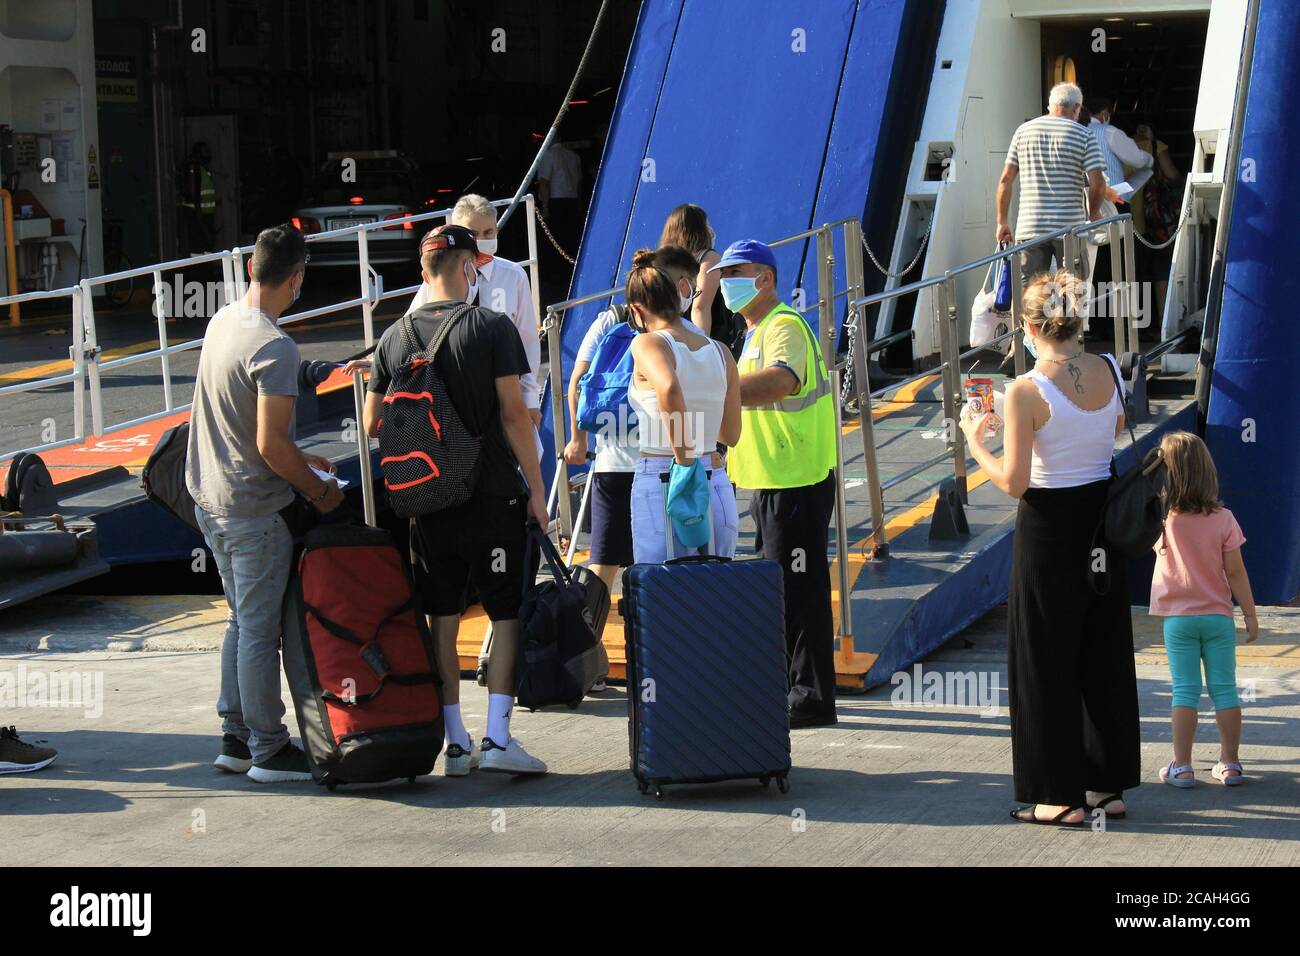 Greece, Piraeus, August 1 2020 - Passengers embarking on a ferry boat with Greek islands as destination. Stock Photo